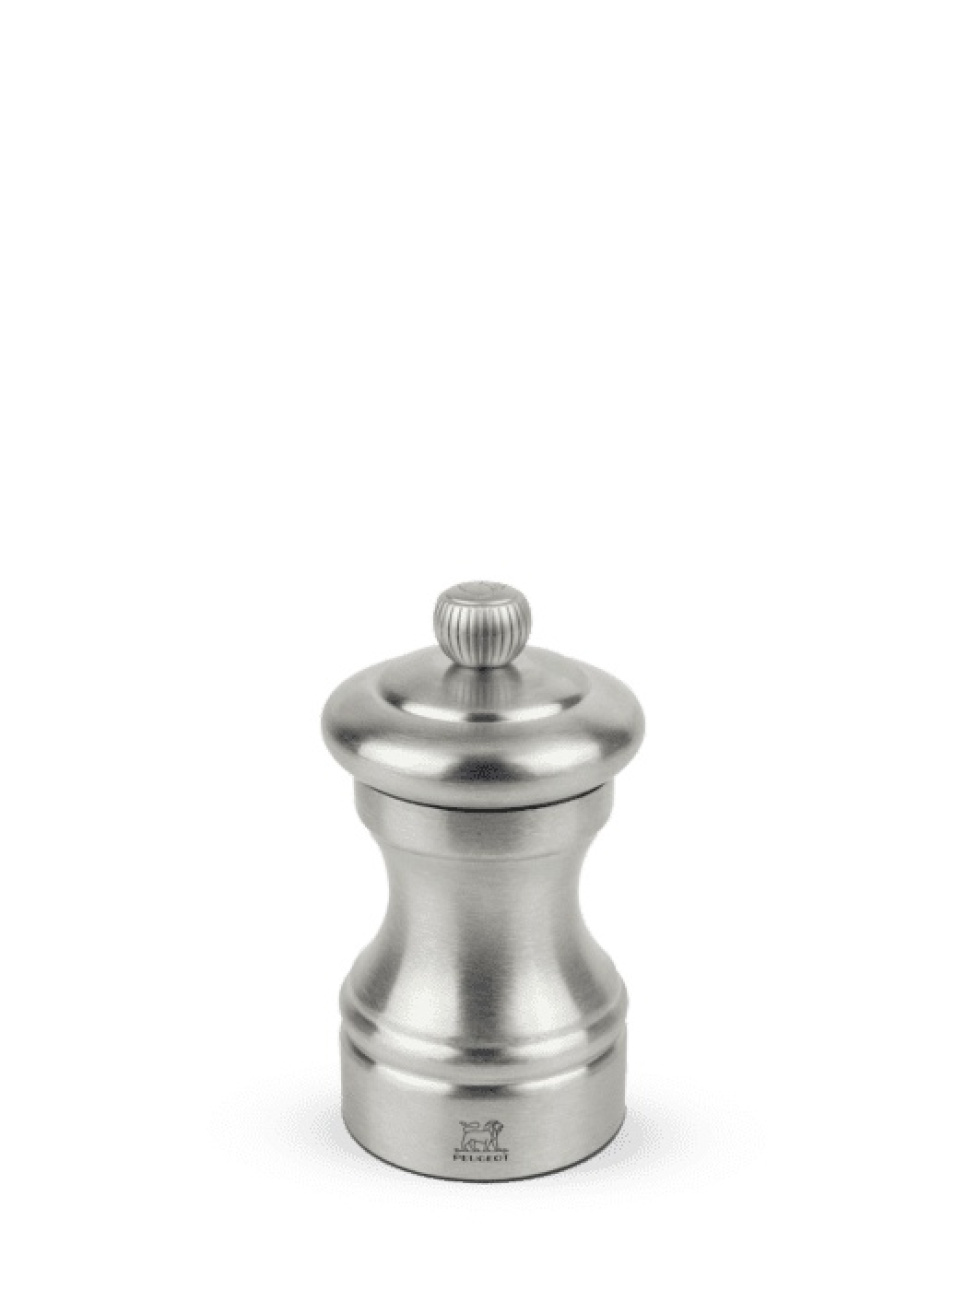 Bistro Chef Pepper mill 10 cm - Peugeot in the group Cooking / Kitchen utensils / Salt & pepper mills at KitchenLab (1090-16696)